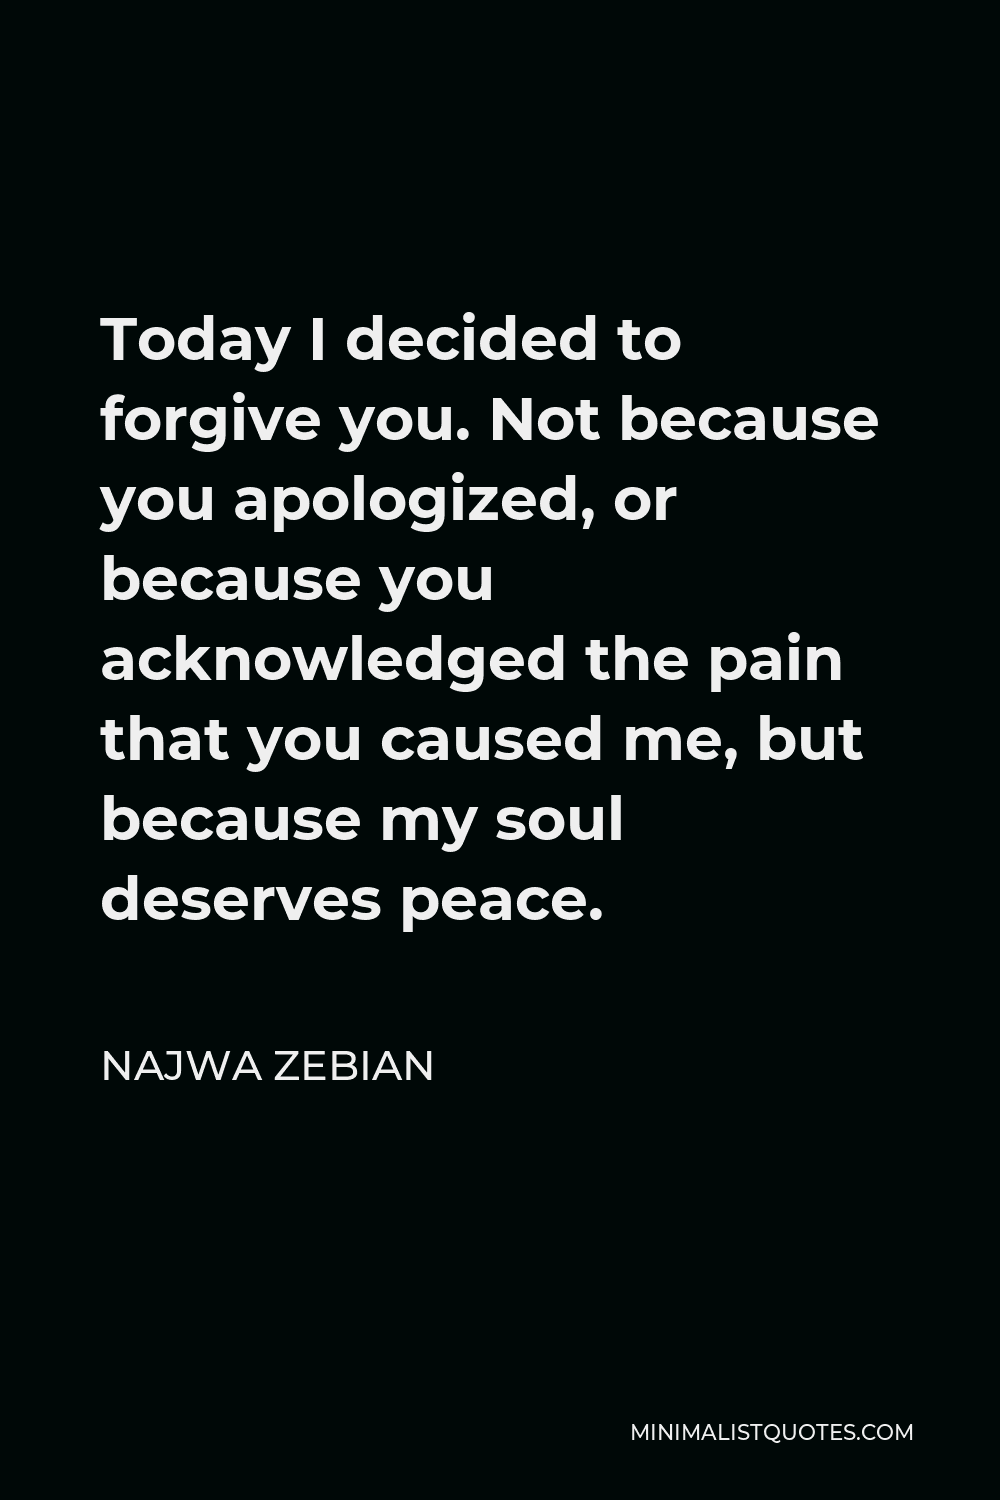 Najwa Zebian Quote - Today I decided to forgive you. Not because you apologized, or because you acknowledged the pain that you caused me, but because my soul deserves peace.